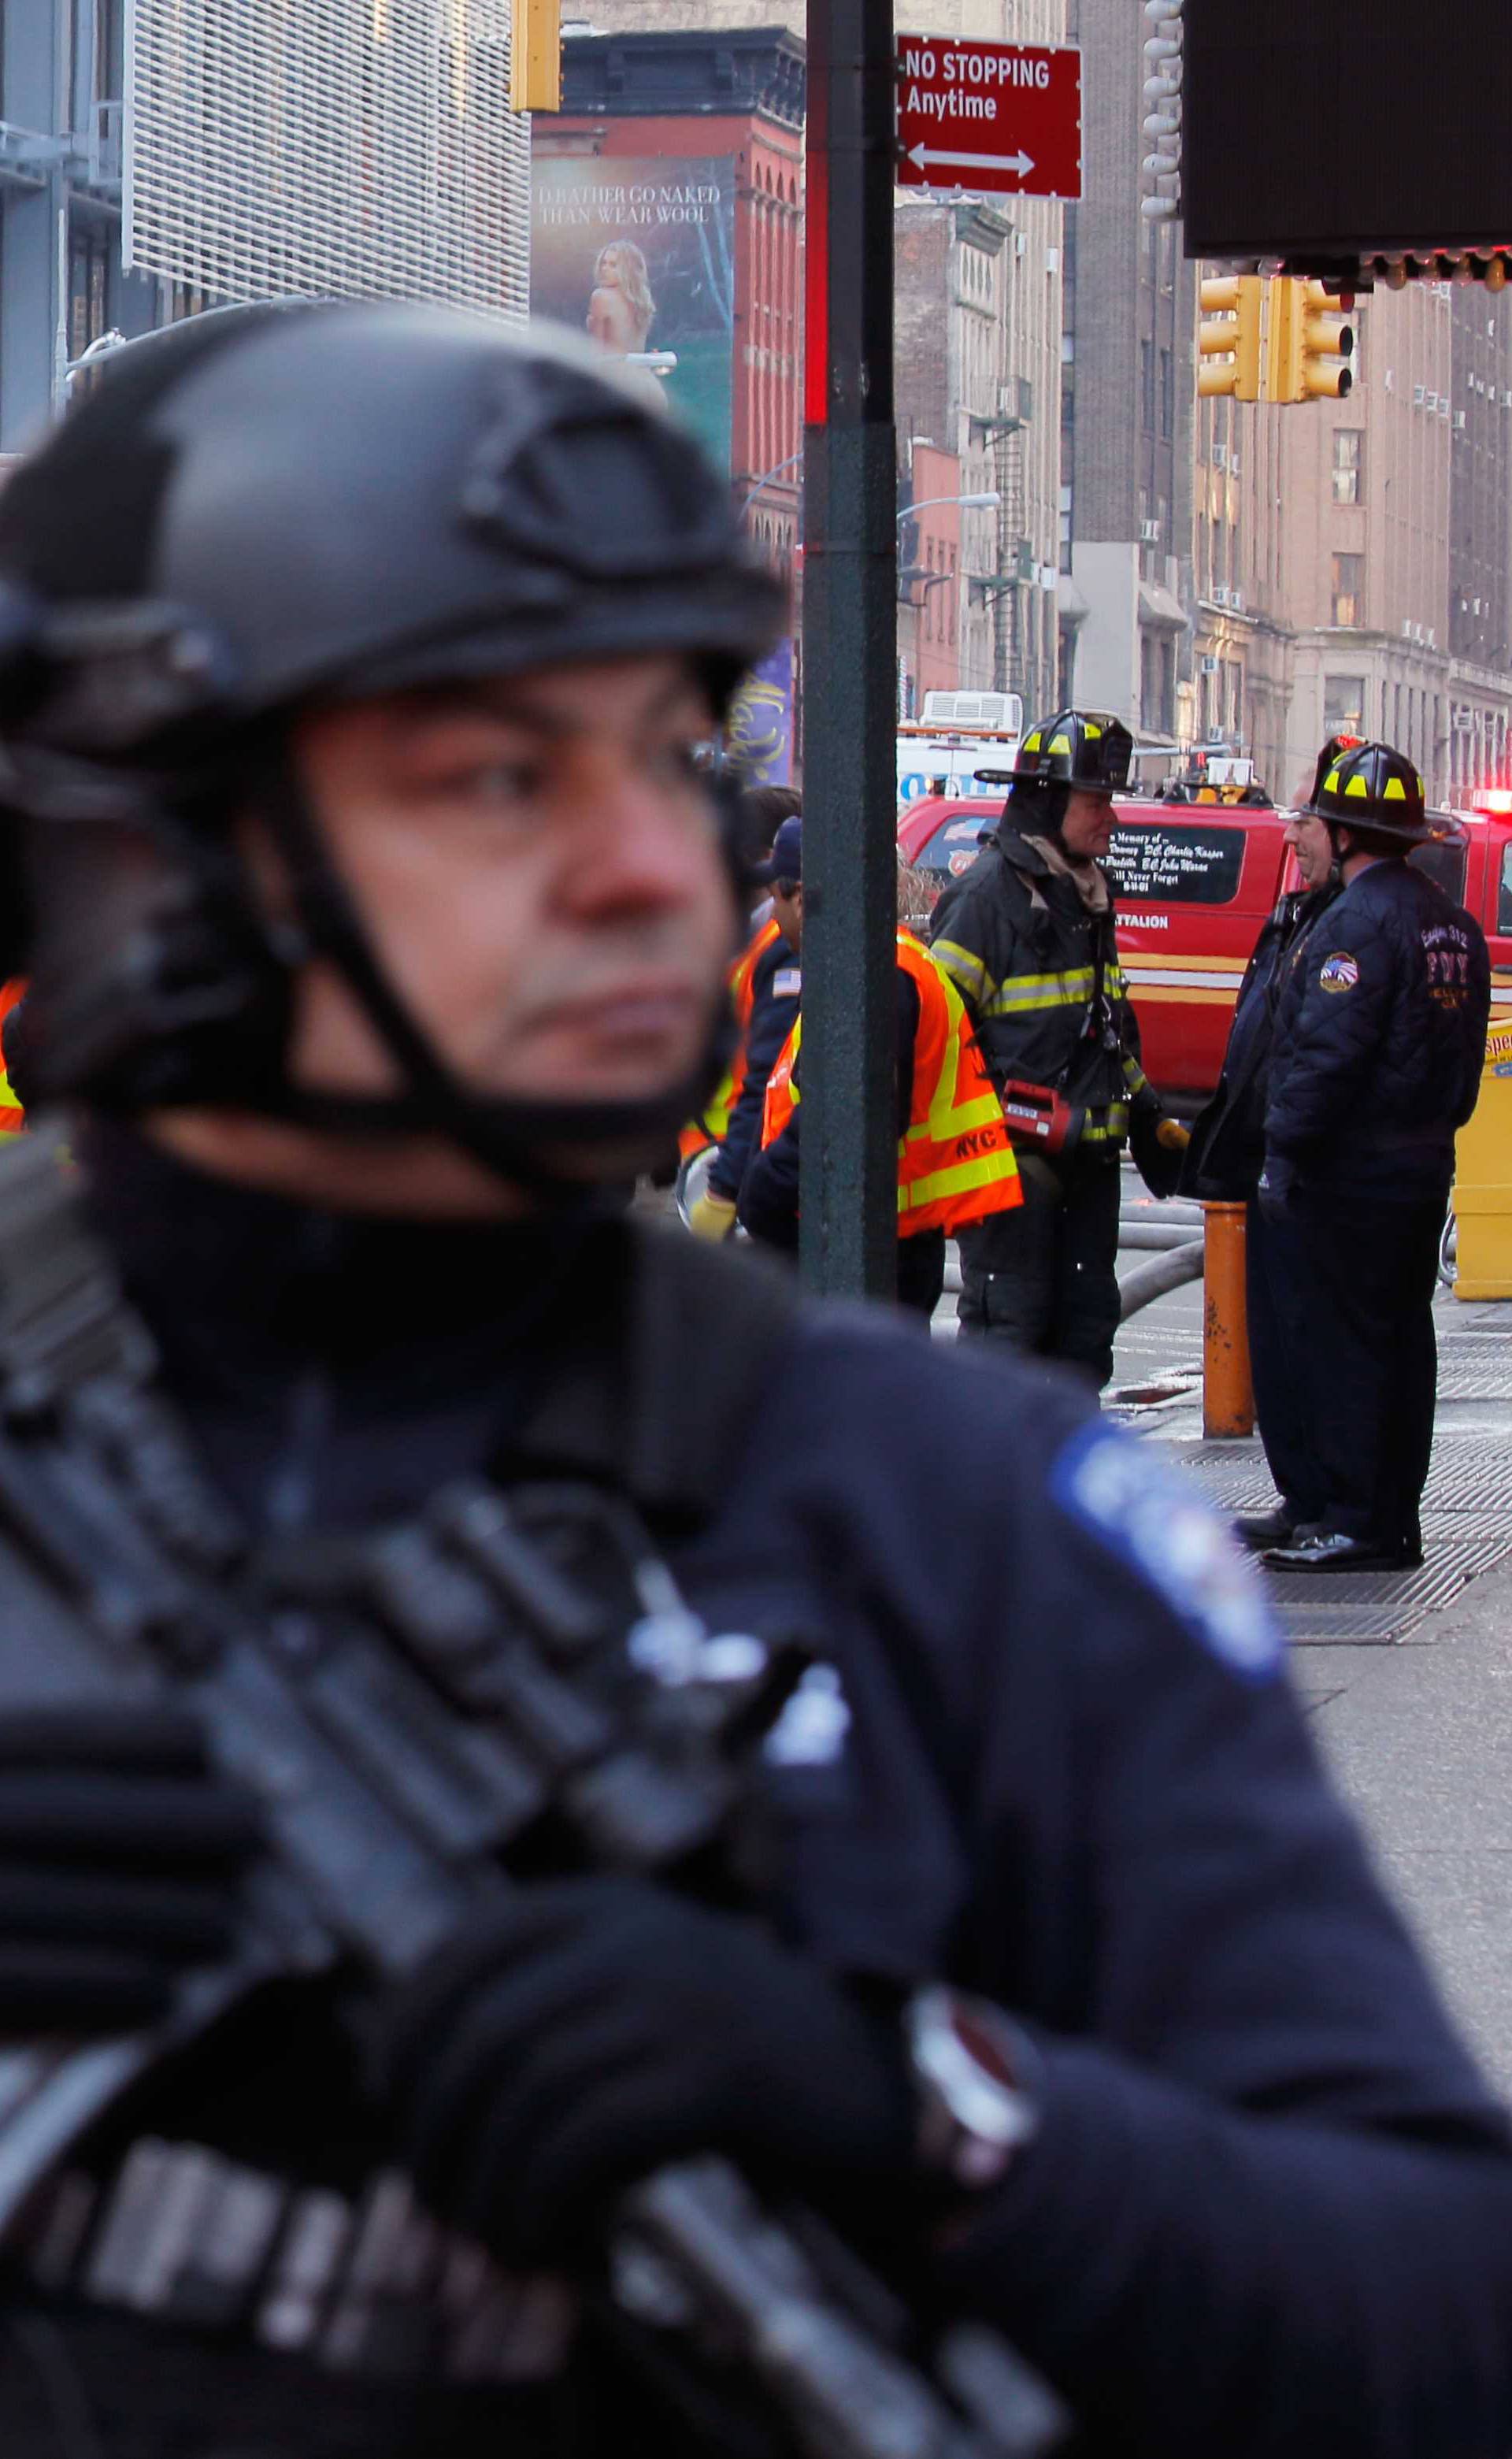 Police officers and fire crew stand outside the New York Port Authority Bus Terminal in New York City after reports of an explosion.